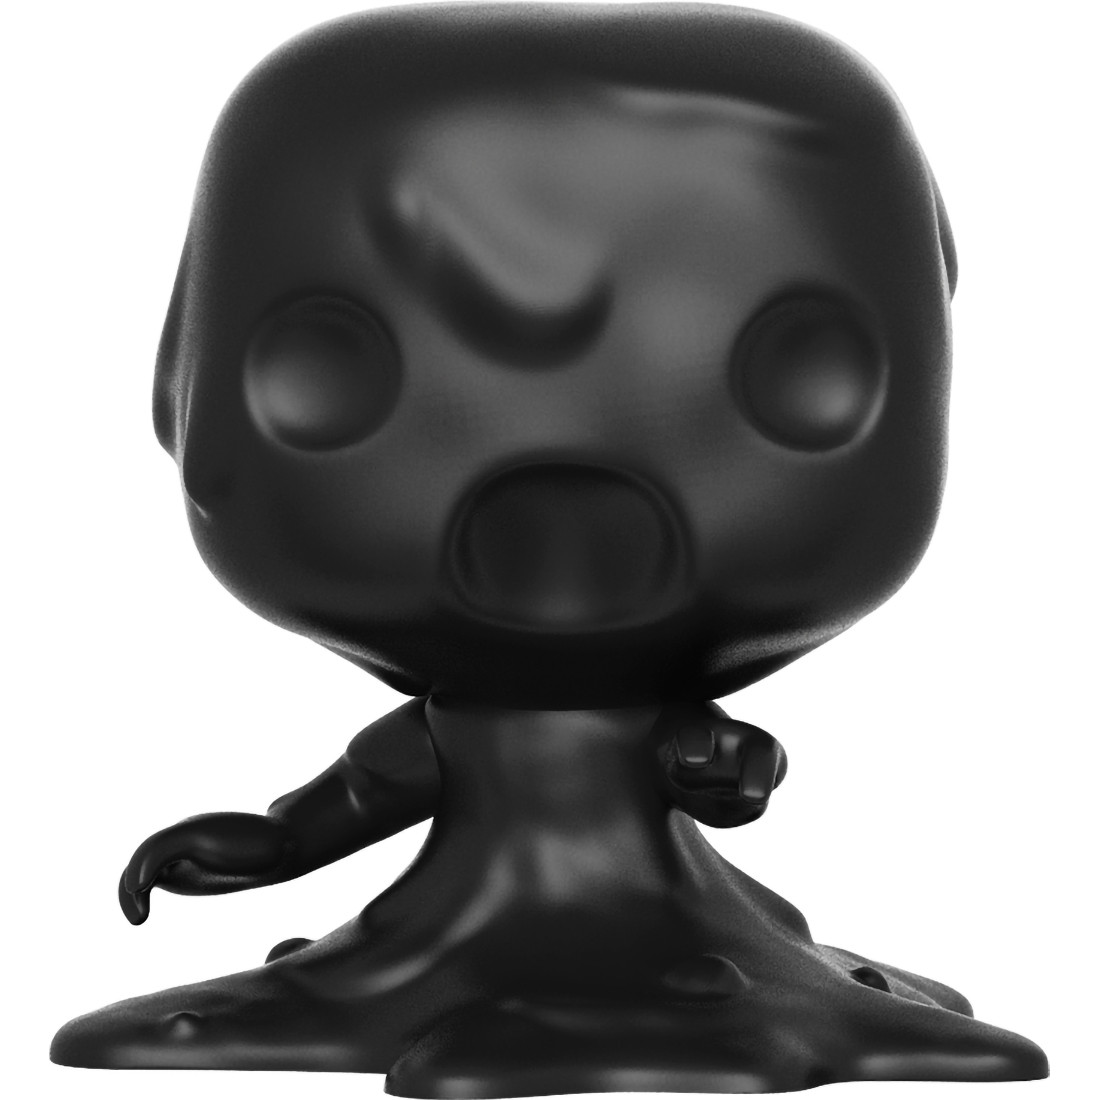 Funko Pop! Games: Bendy and the Ink Machine - Ink Bendy — Sure